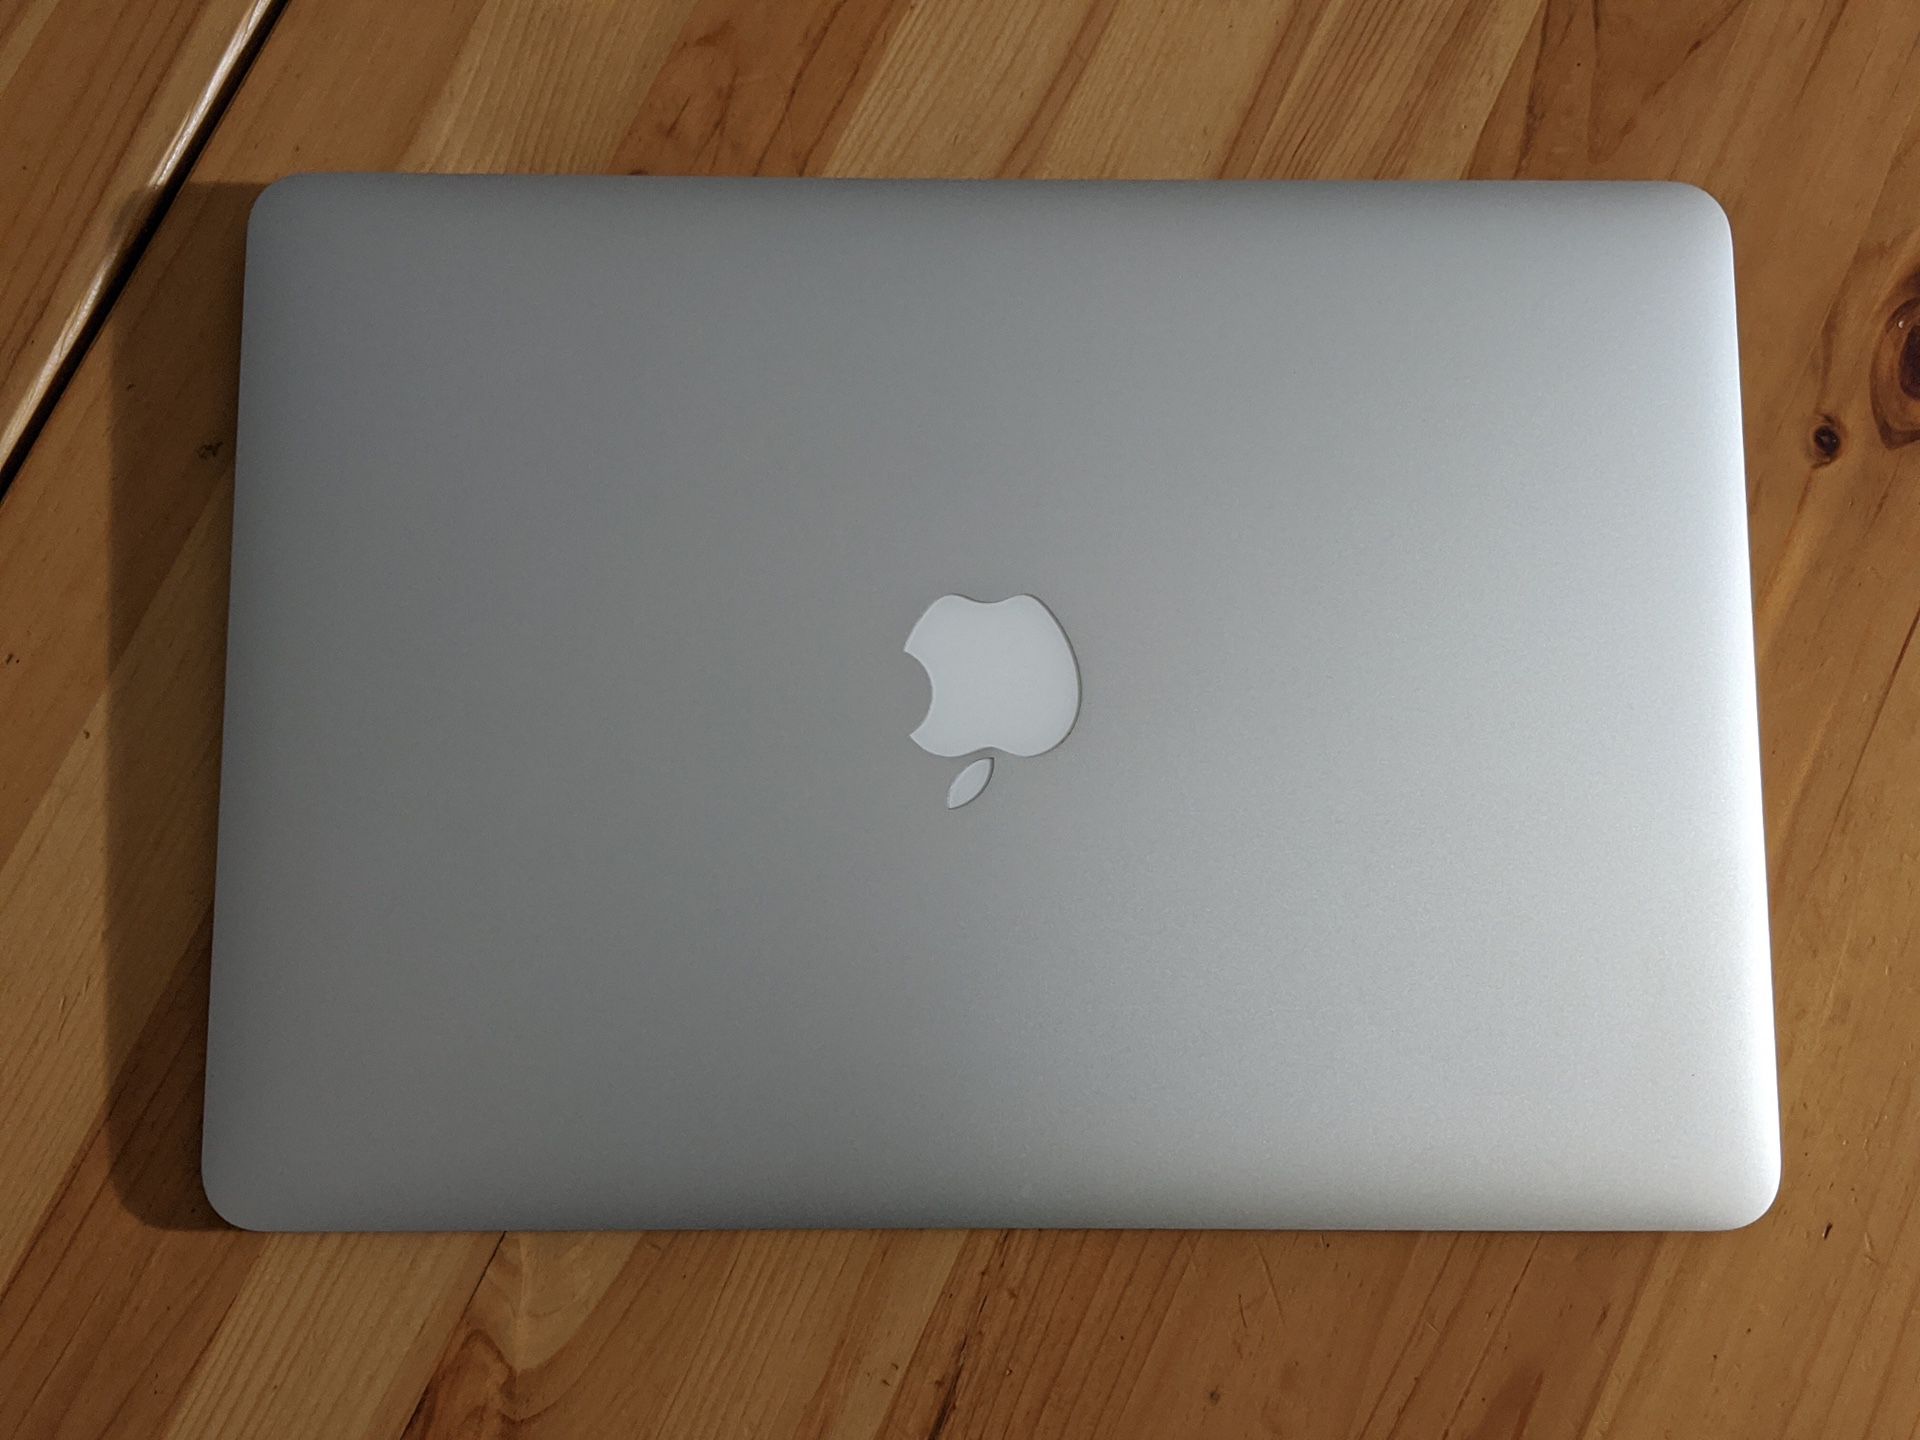 Macbook Air 2015 with Brand New Hard Drive